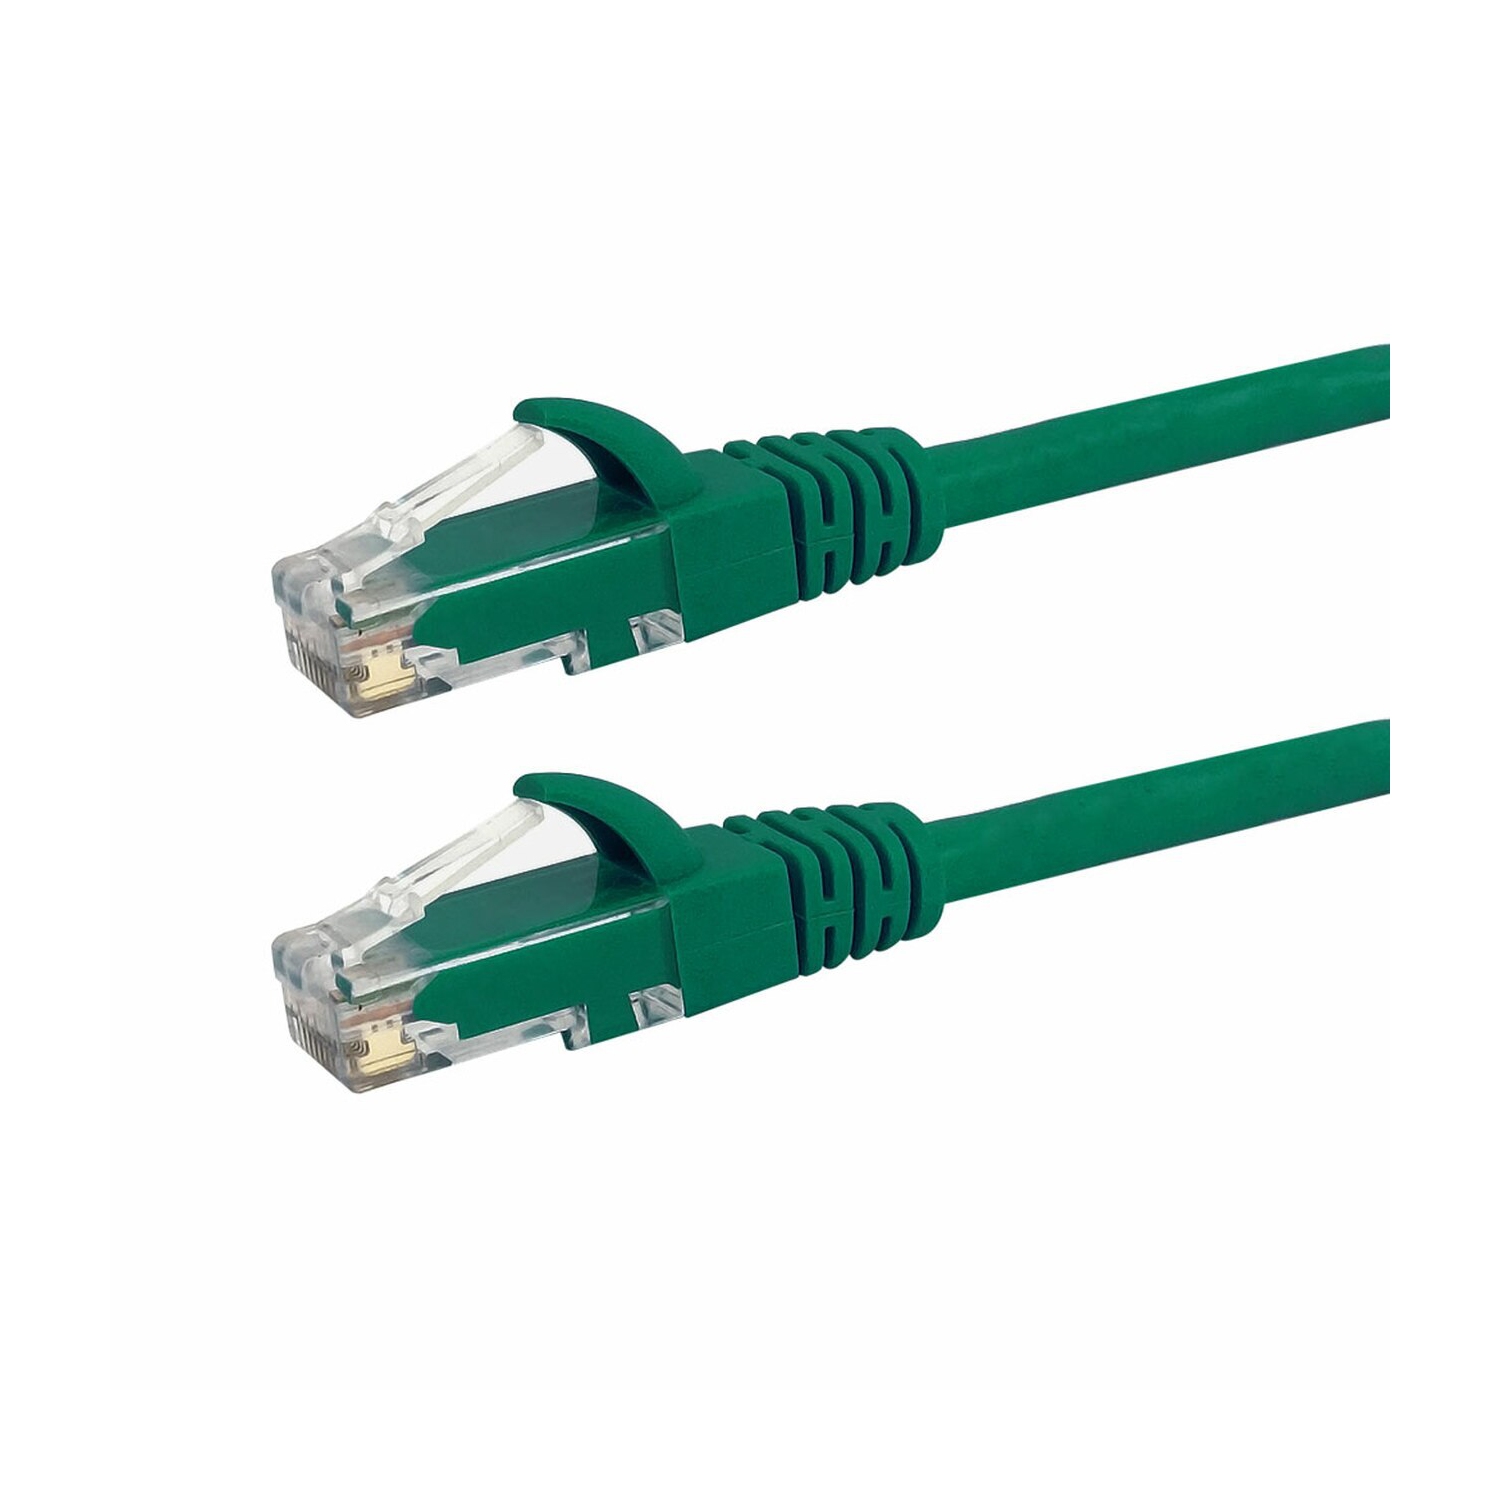 HYFAI CAT6 550MHz Molded Networking RJ45 Patch Cable - Premium Fluke® Certified - CMR Riser Rated 2 FT, Green